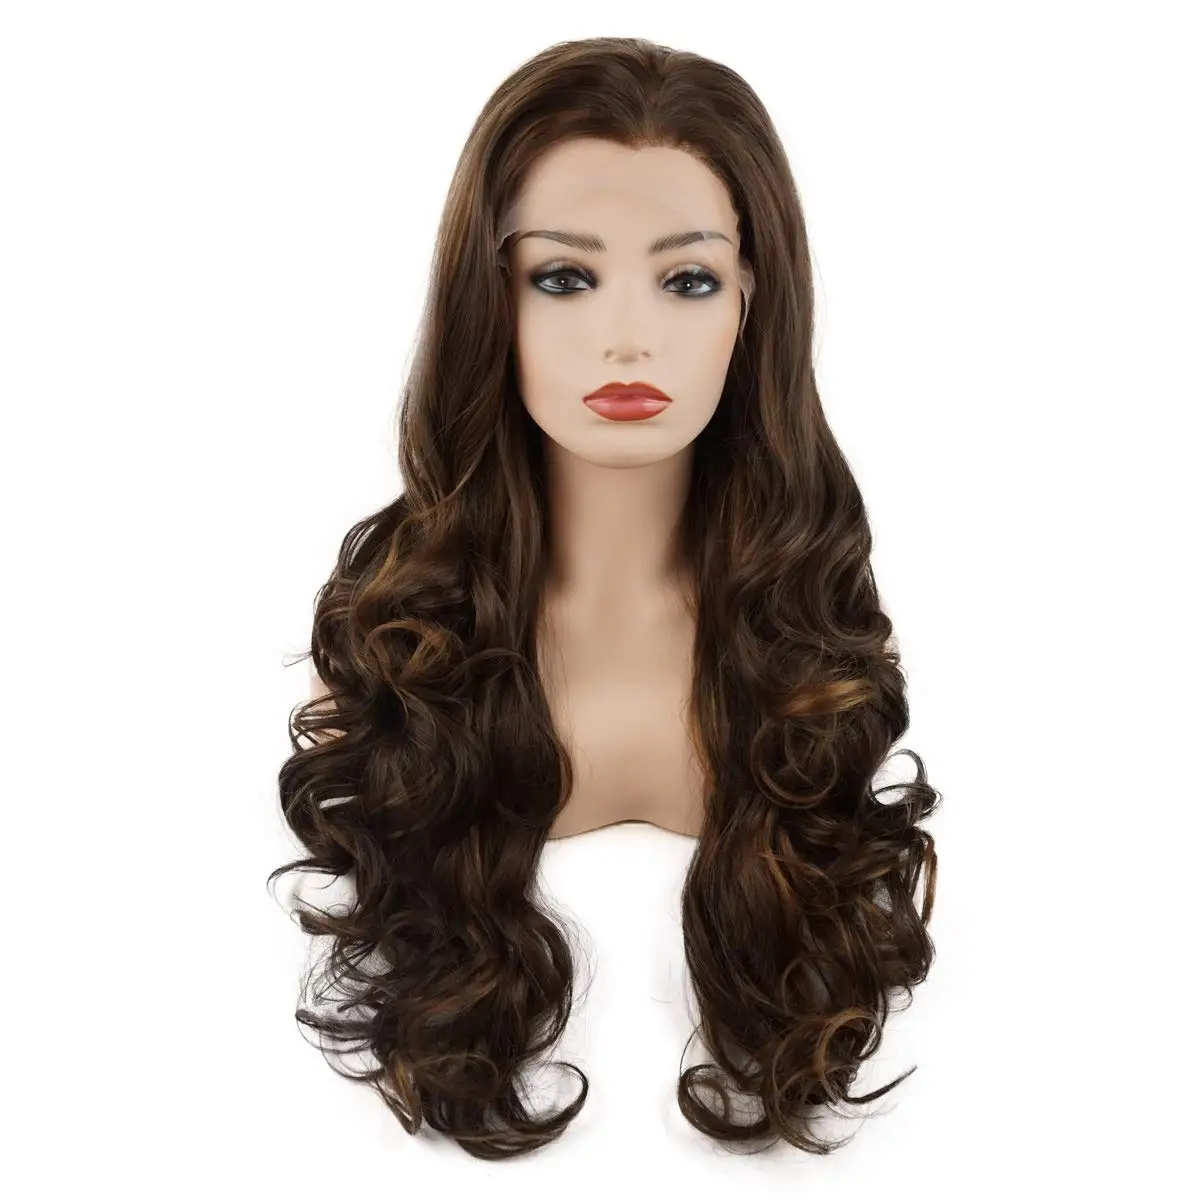 

Jeelion Hair Wavy Long 26inch Brown Blonde Mix Half Hand Tied Heavy Density Realistic Synthetic Lace Front Wigs